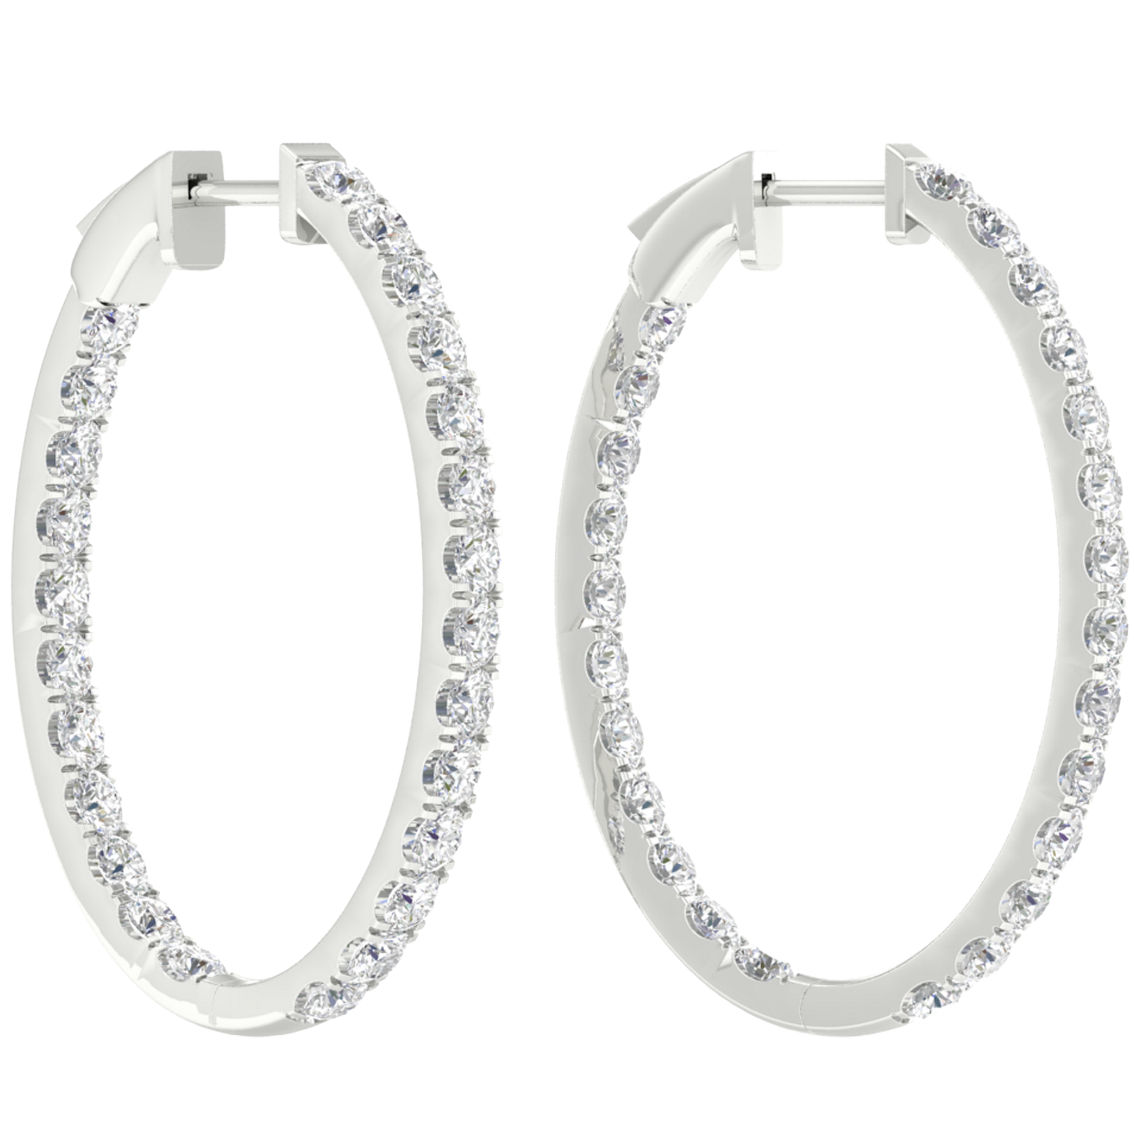 Pure Brilliance 14K White Gold 4 CTW Hoop Earring with IGI Certification - Image 2 of 2